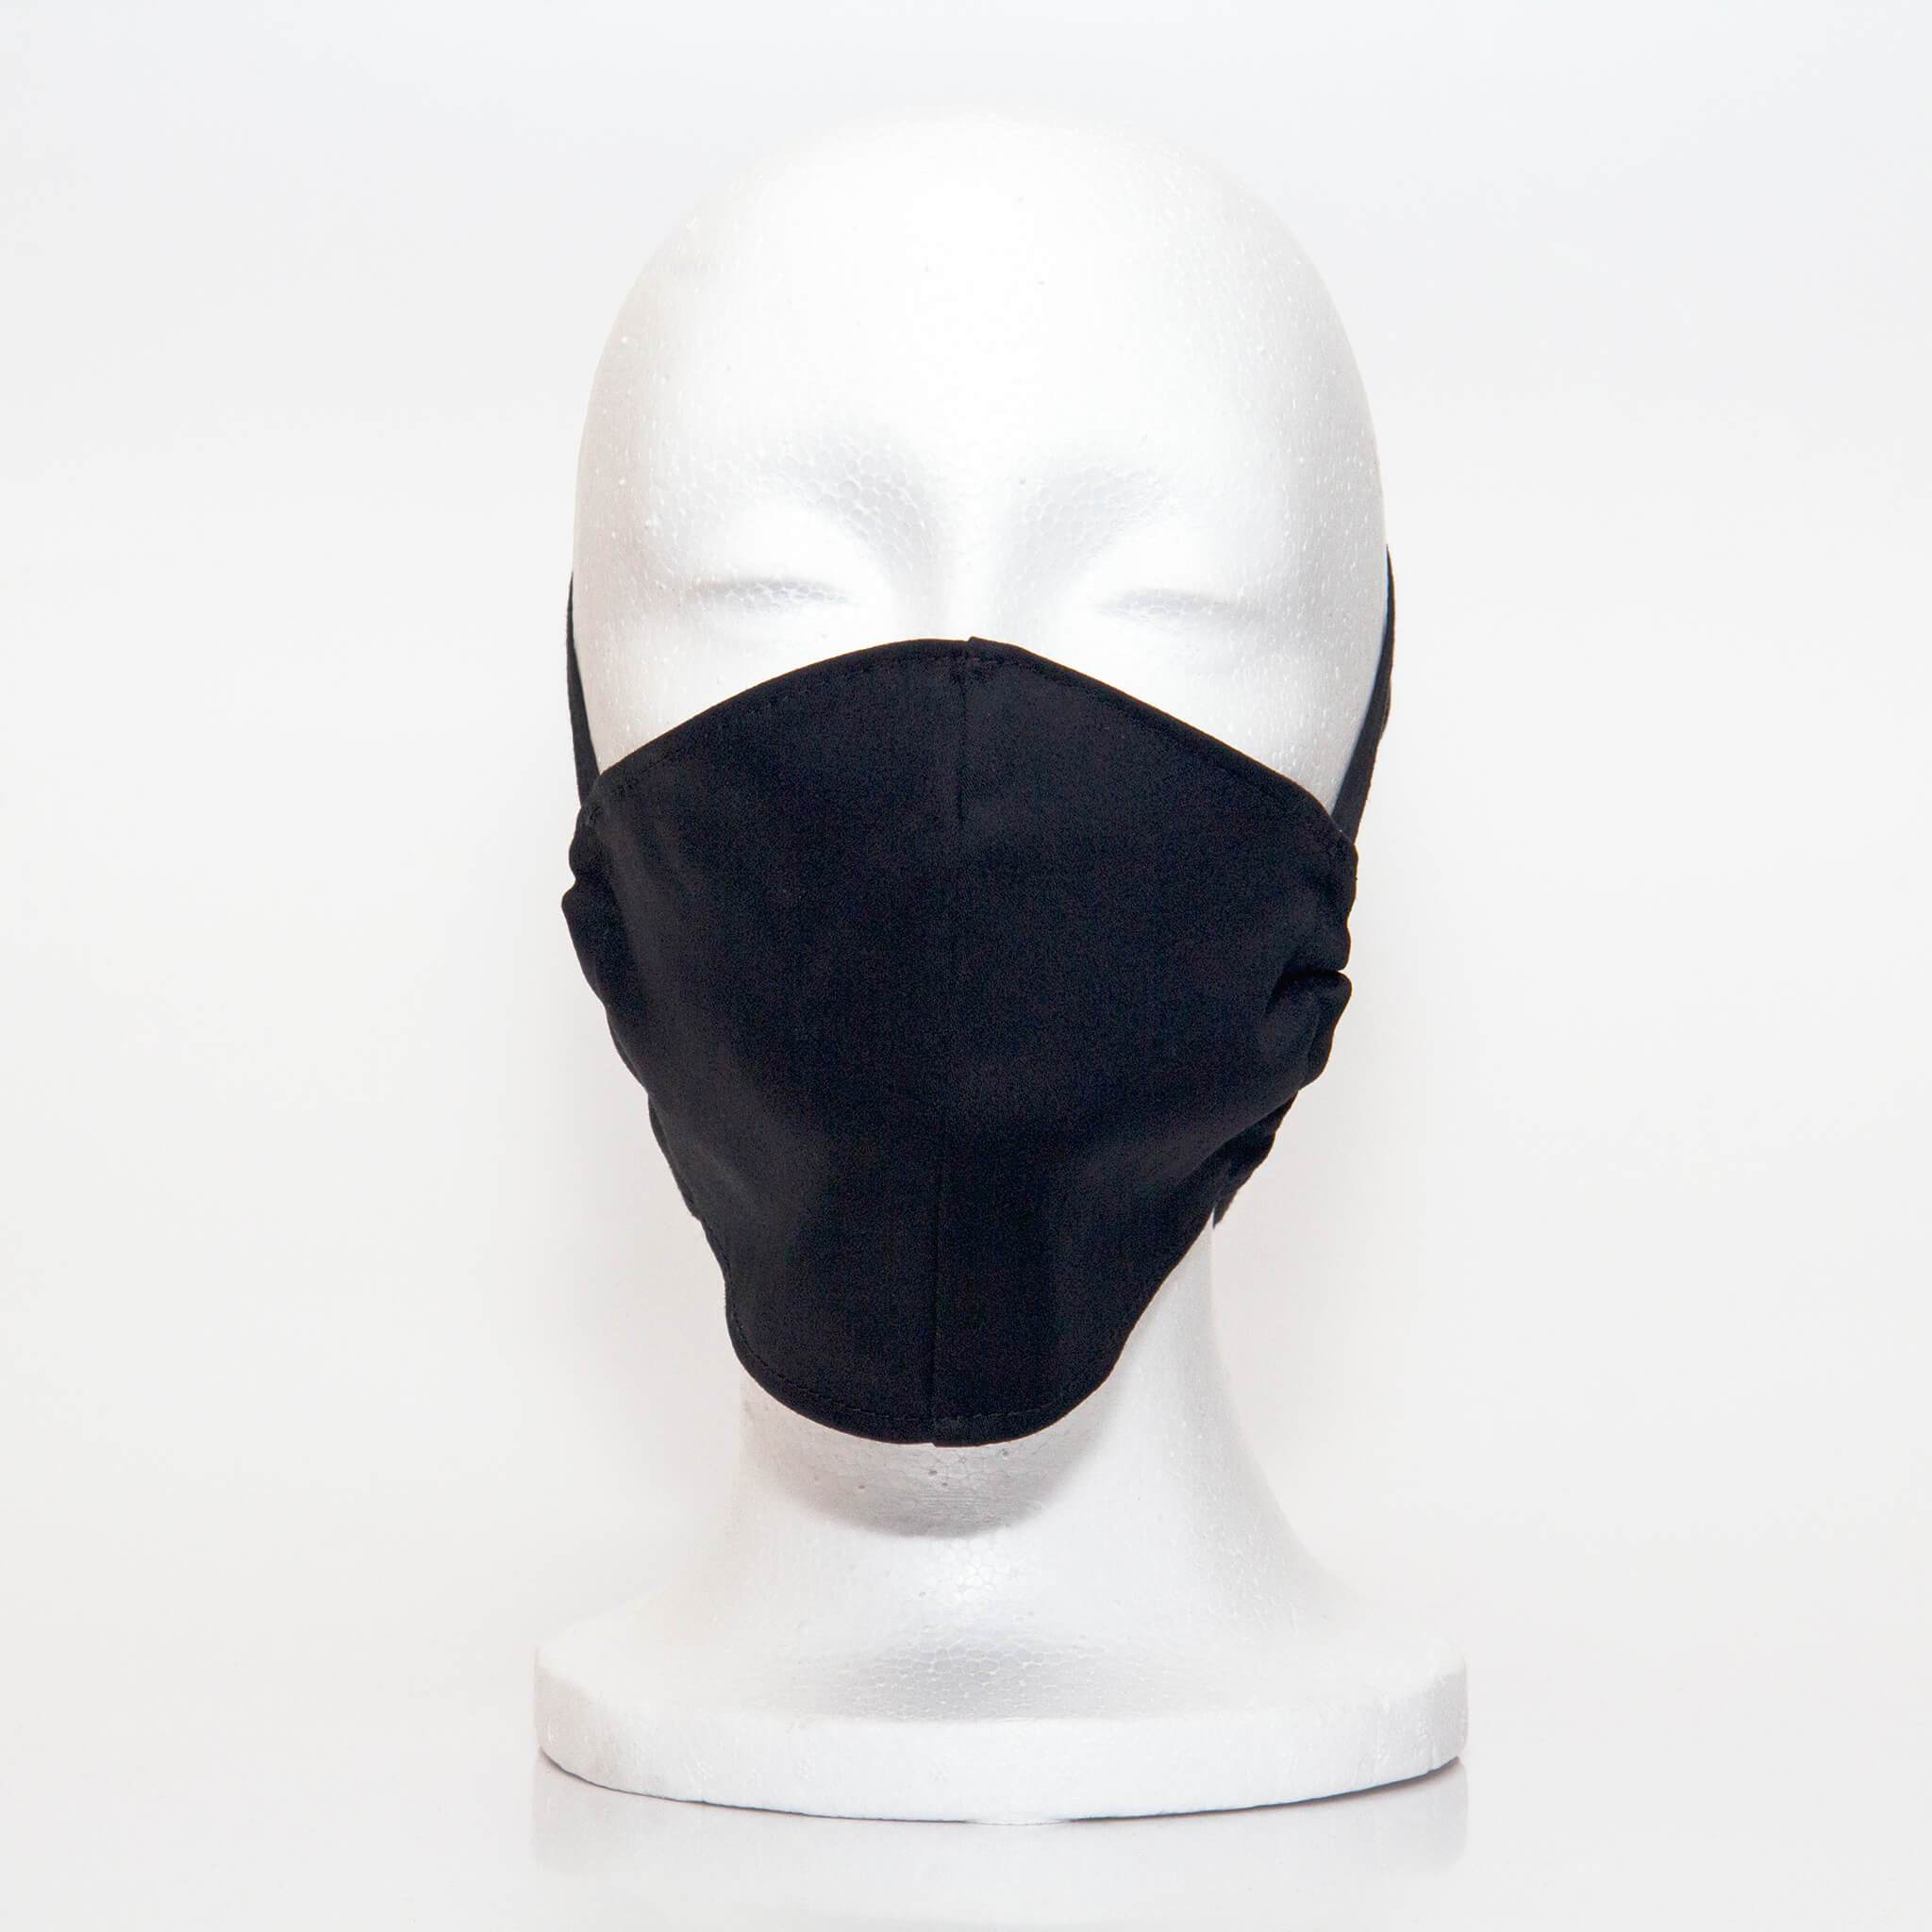 Black Alpha Mask Front View: Solid black colour fabric face mask contoured to fit comfortably on your face. This is a 3 layer fabric mask with a middle pocket to insert the filter as the third layer. The bias binding straps is easily adjustable for your comfort and ties behind your head. This mask has a removable filter. This mask an unisex adult fit.